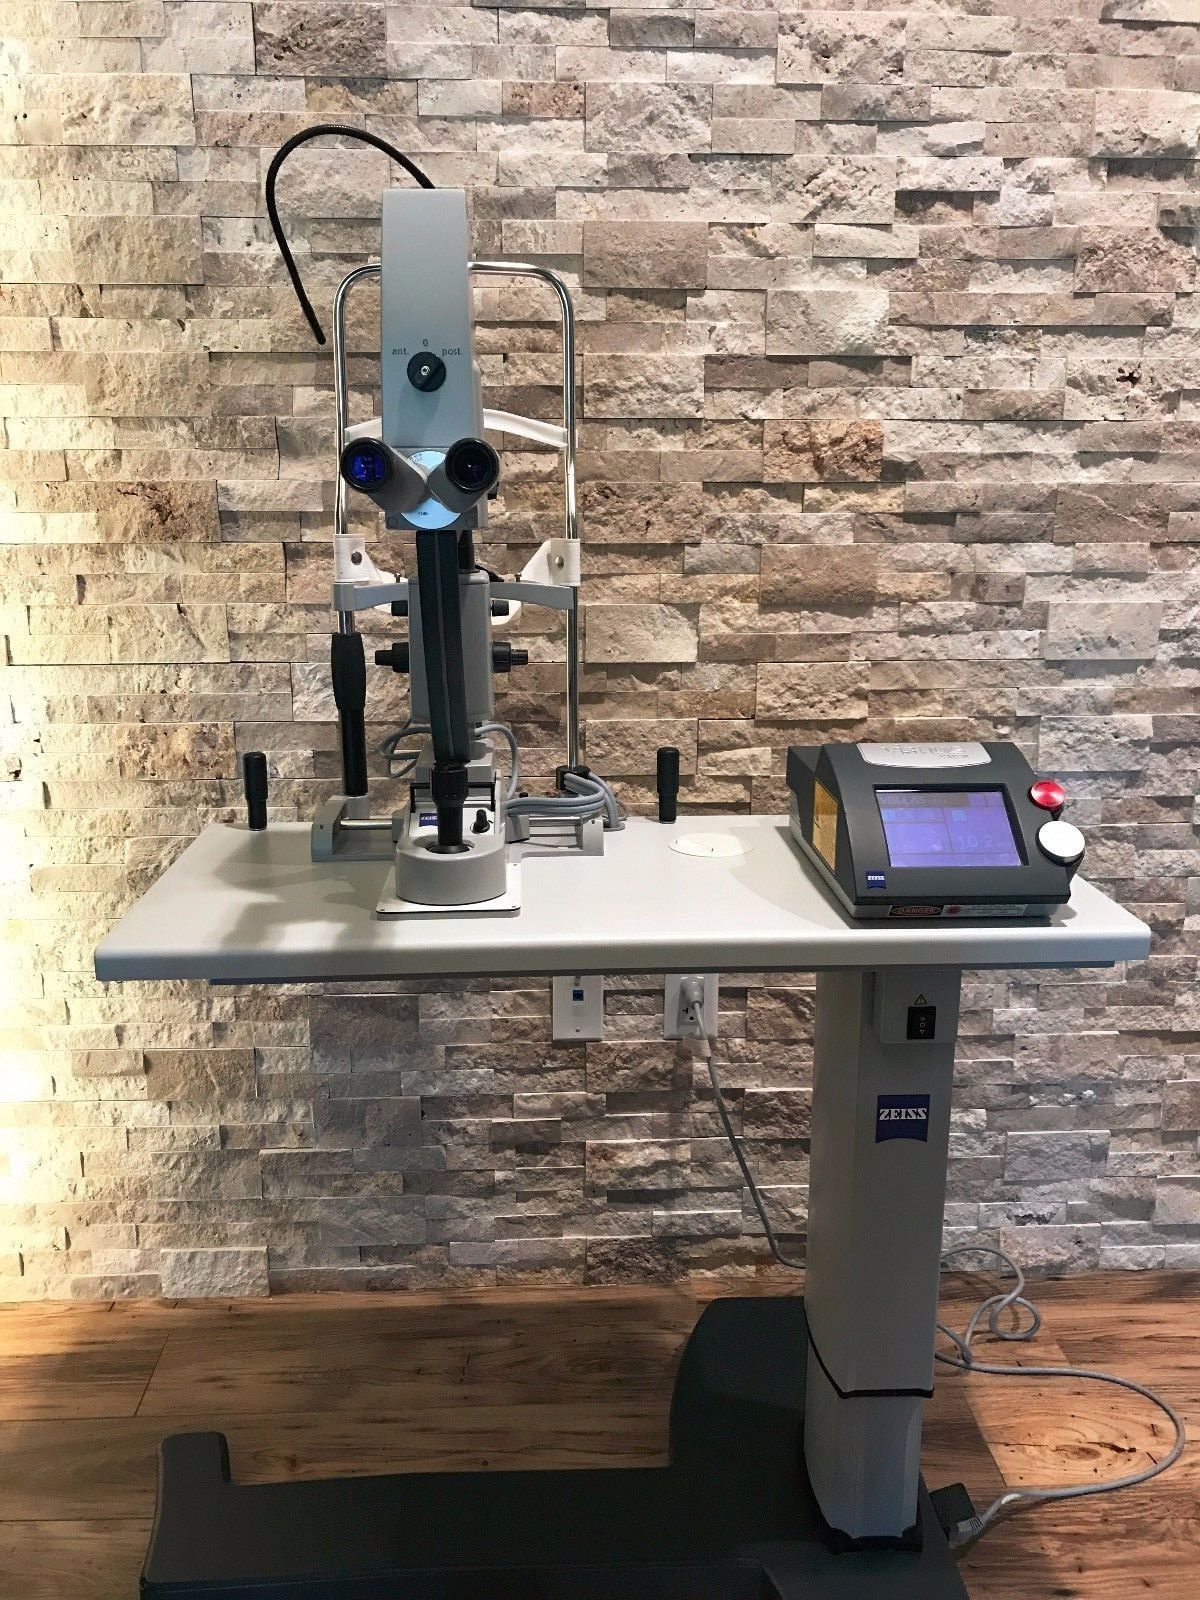 Zeiss Visulas Yag 3 ZEISS OPMI Visu 150 Surgical Ophthalmic Microscope on Universal S5 Stand Base